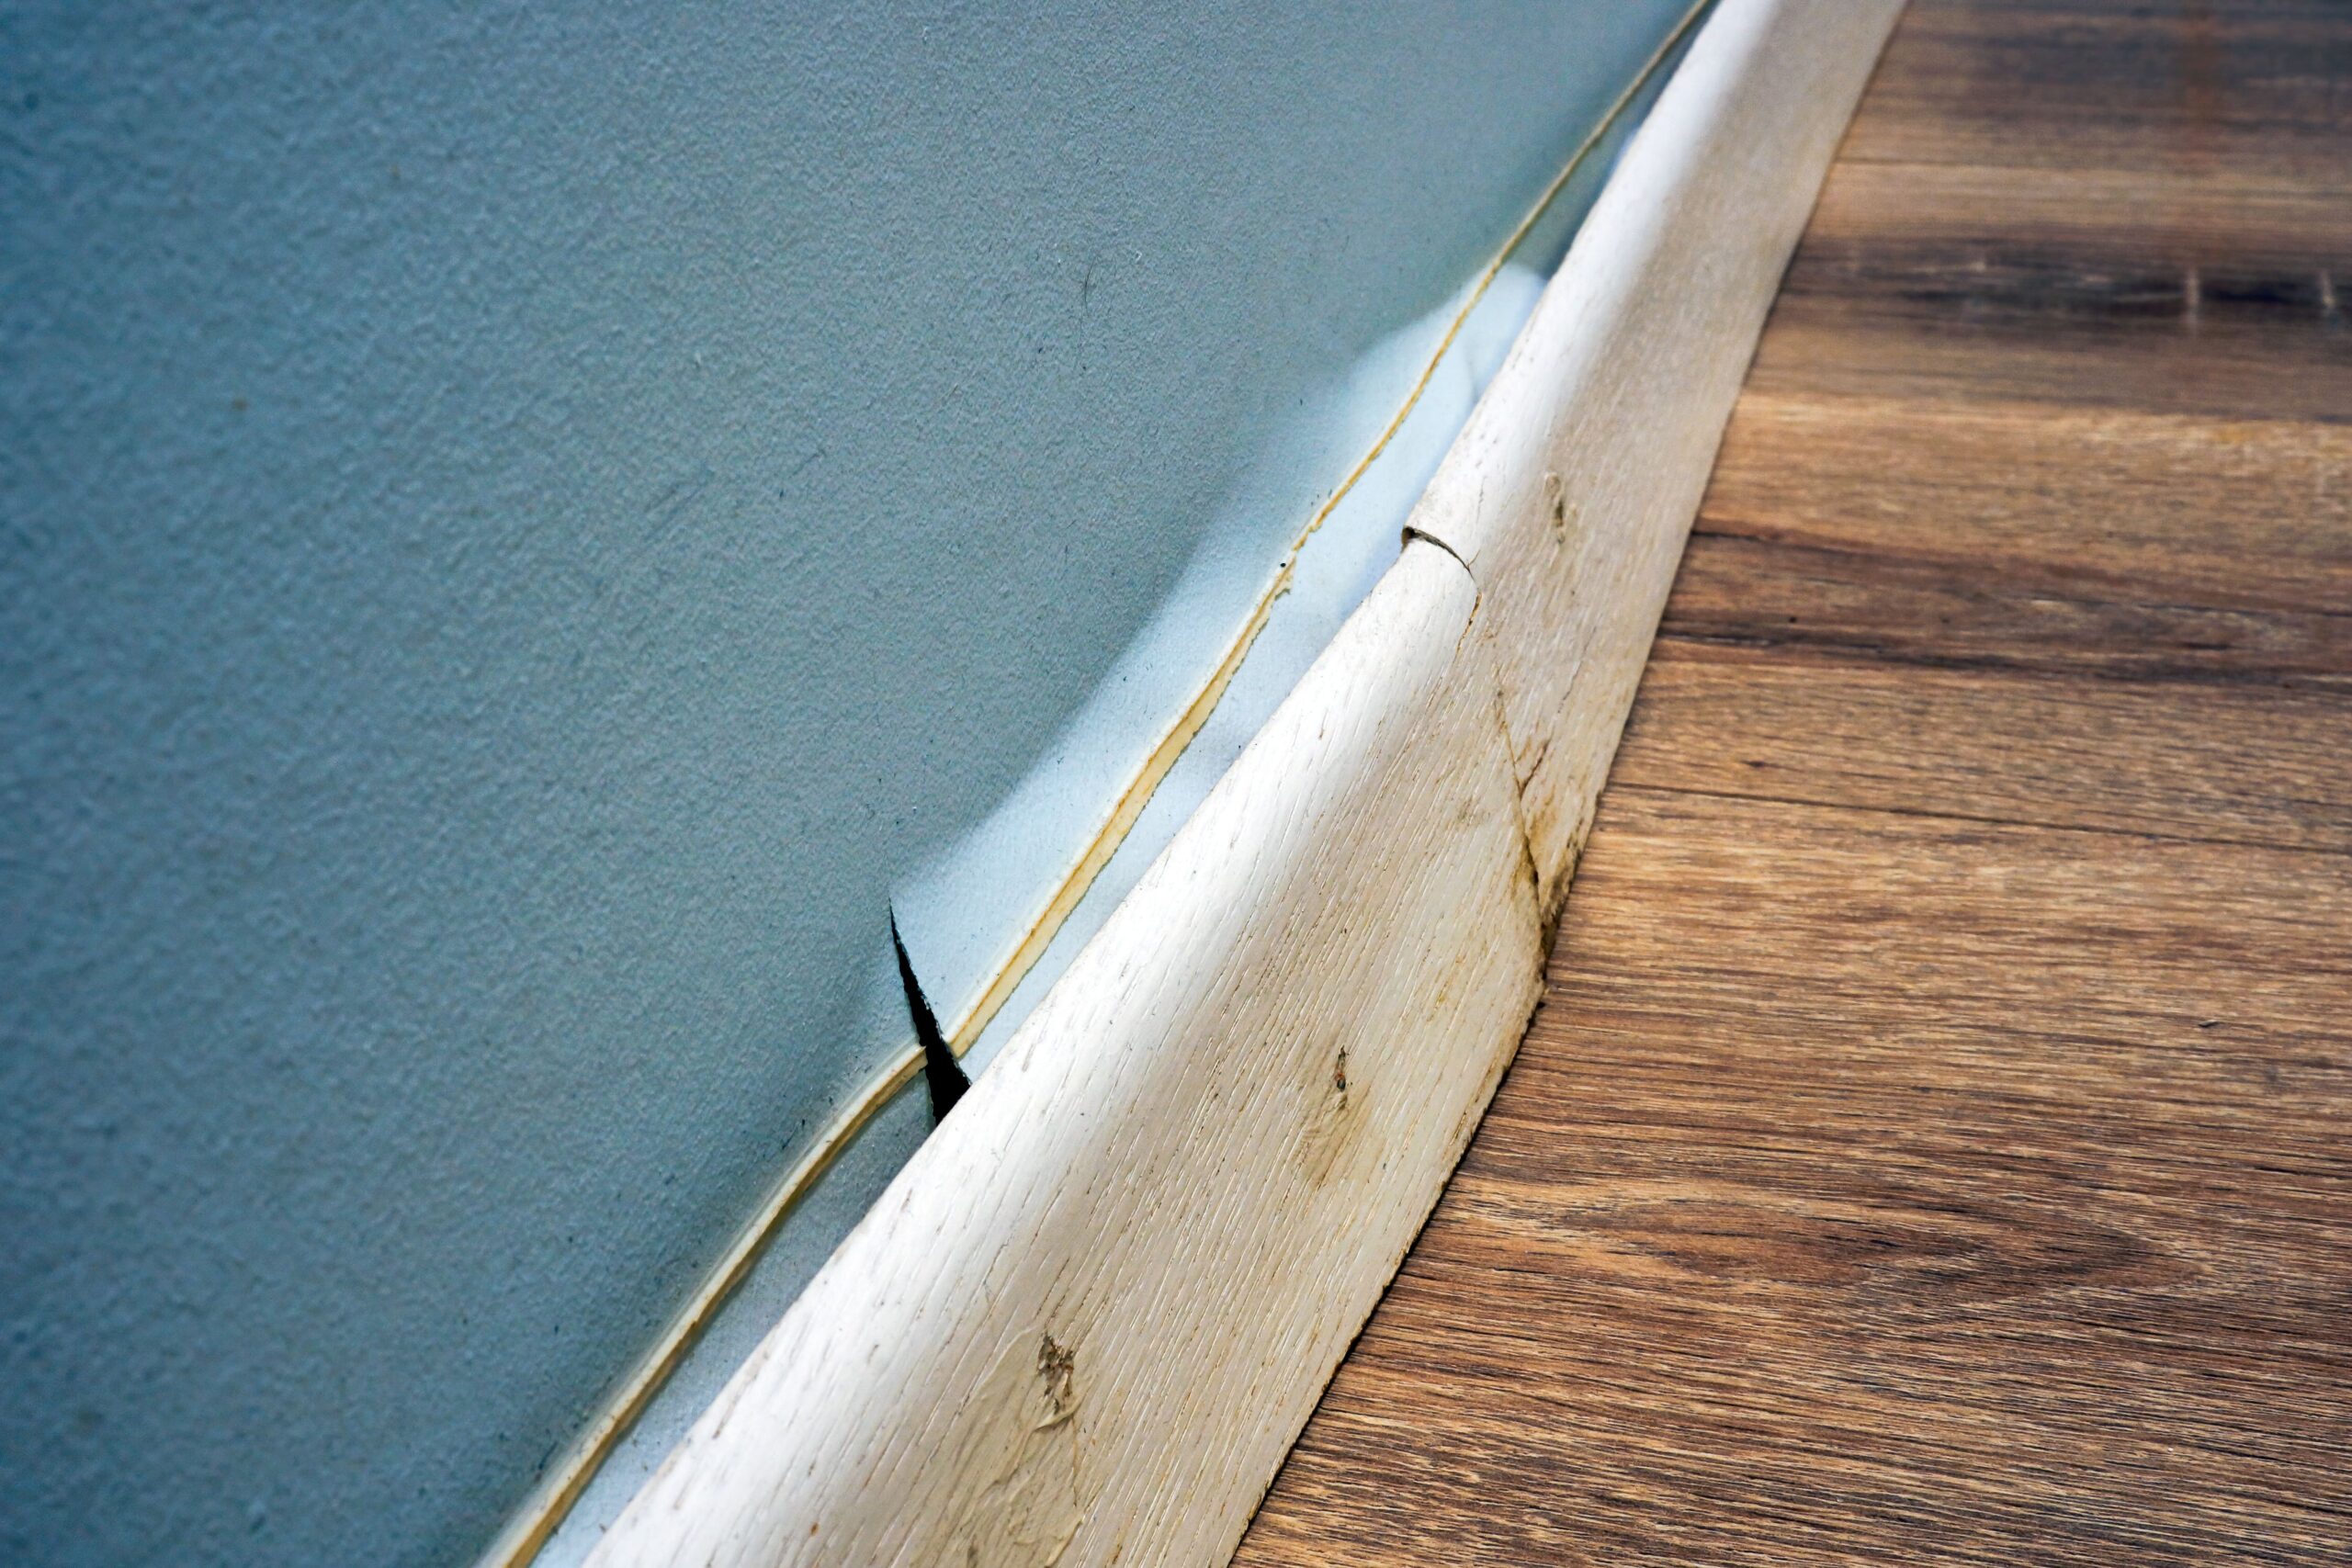 Water Damaged Baseboards: How To Fix Them